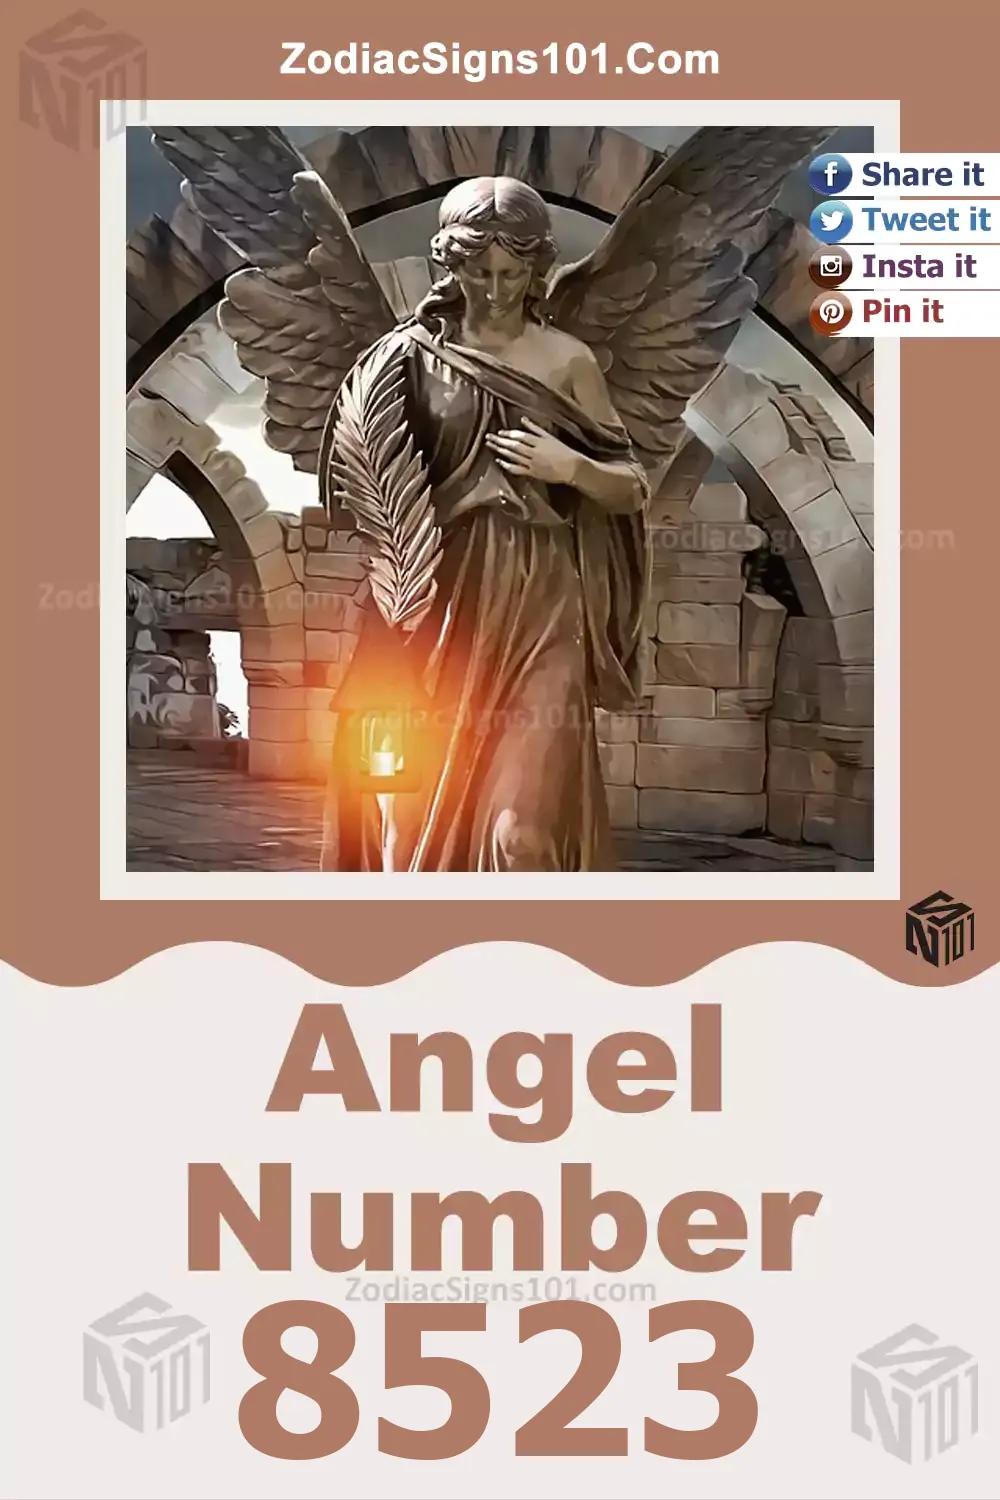 8523 Angel Number Meaning